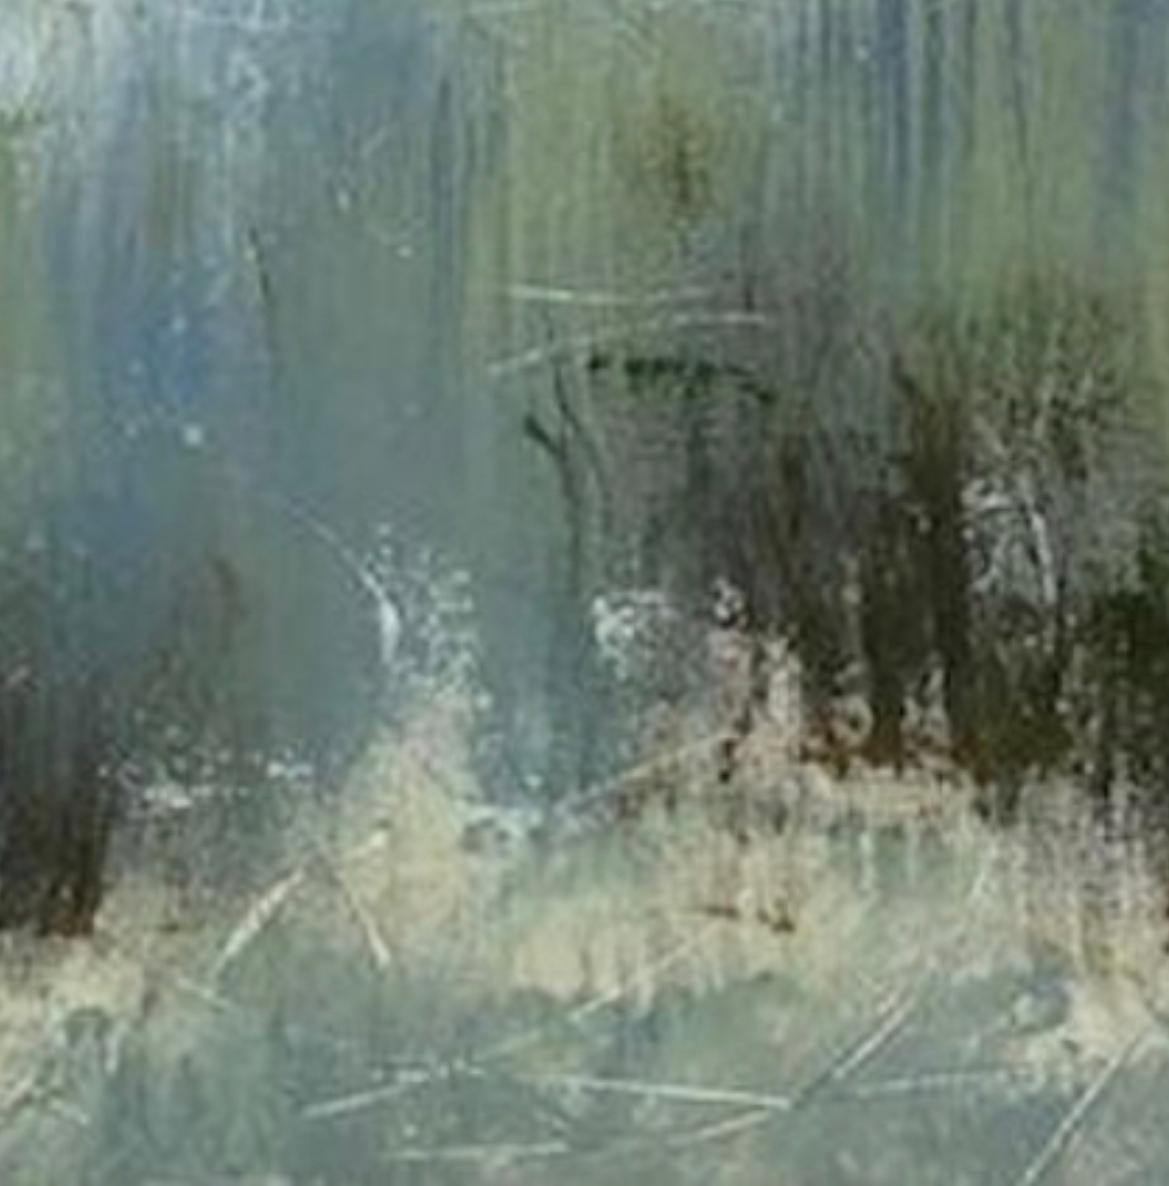 The marsh holds mysteries as does this marsh painting.  It is a merge between abstract painting and impressionism with a contemporary flair.